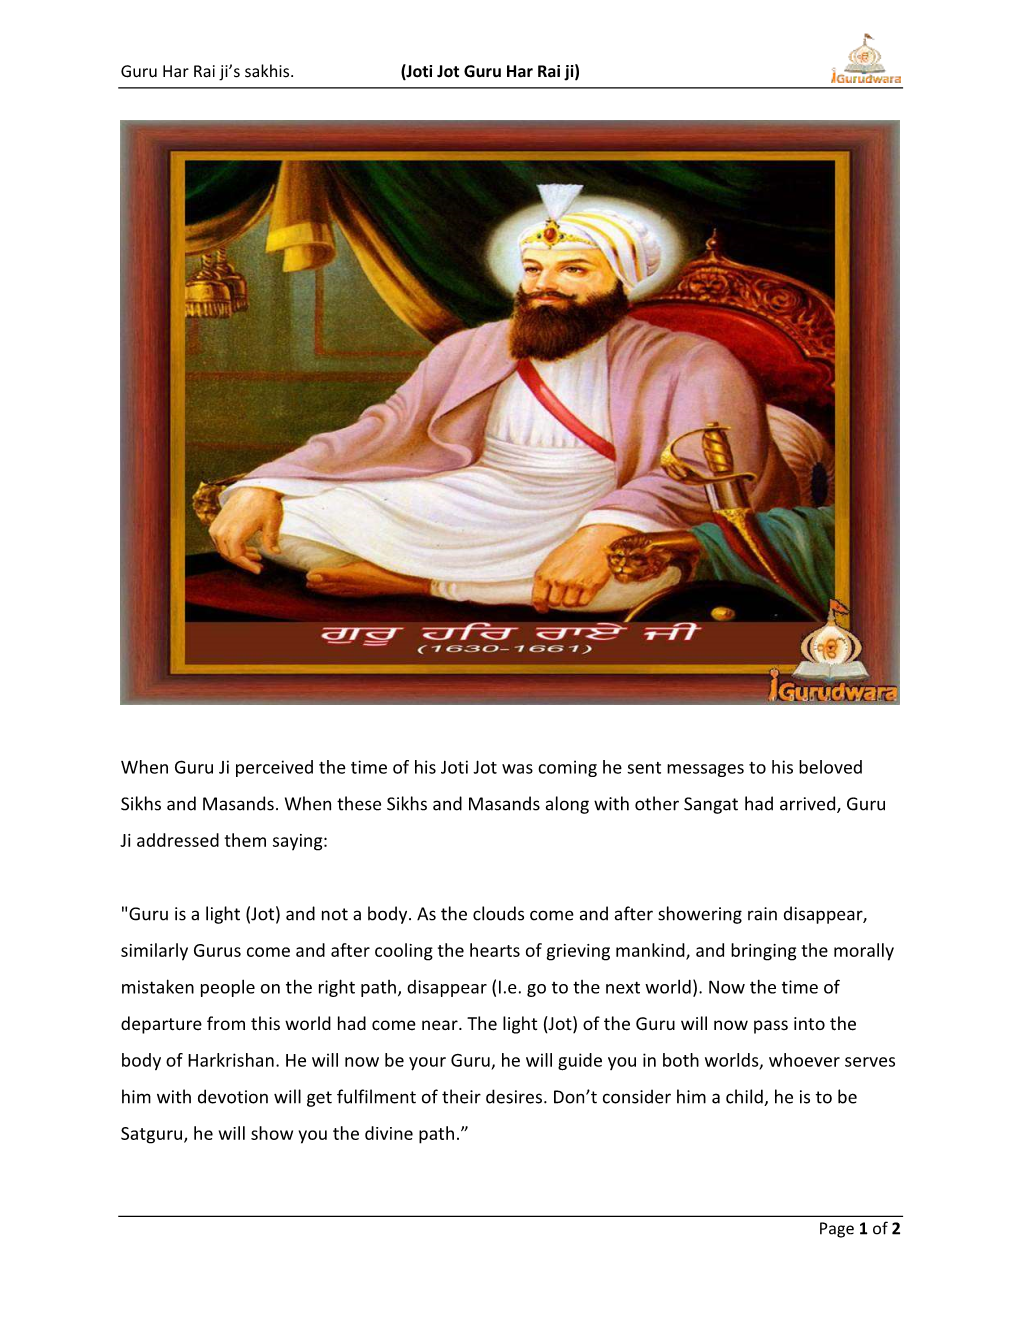 When Guru Ji Perceived the Time of His Joti Jot Was Coming He Sent Messages to His Beloved Sikhs and Masands